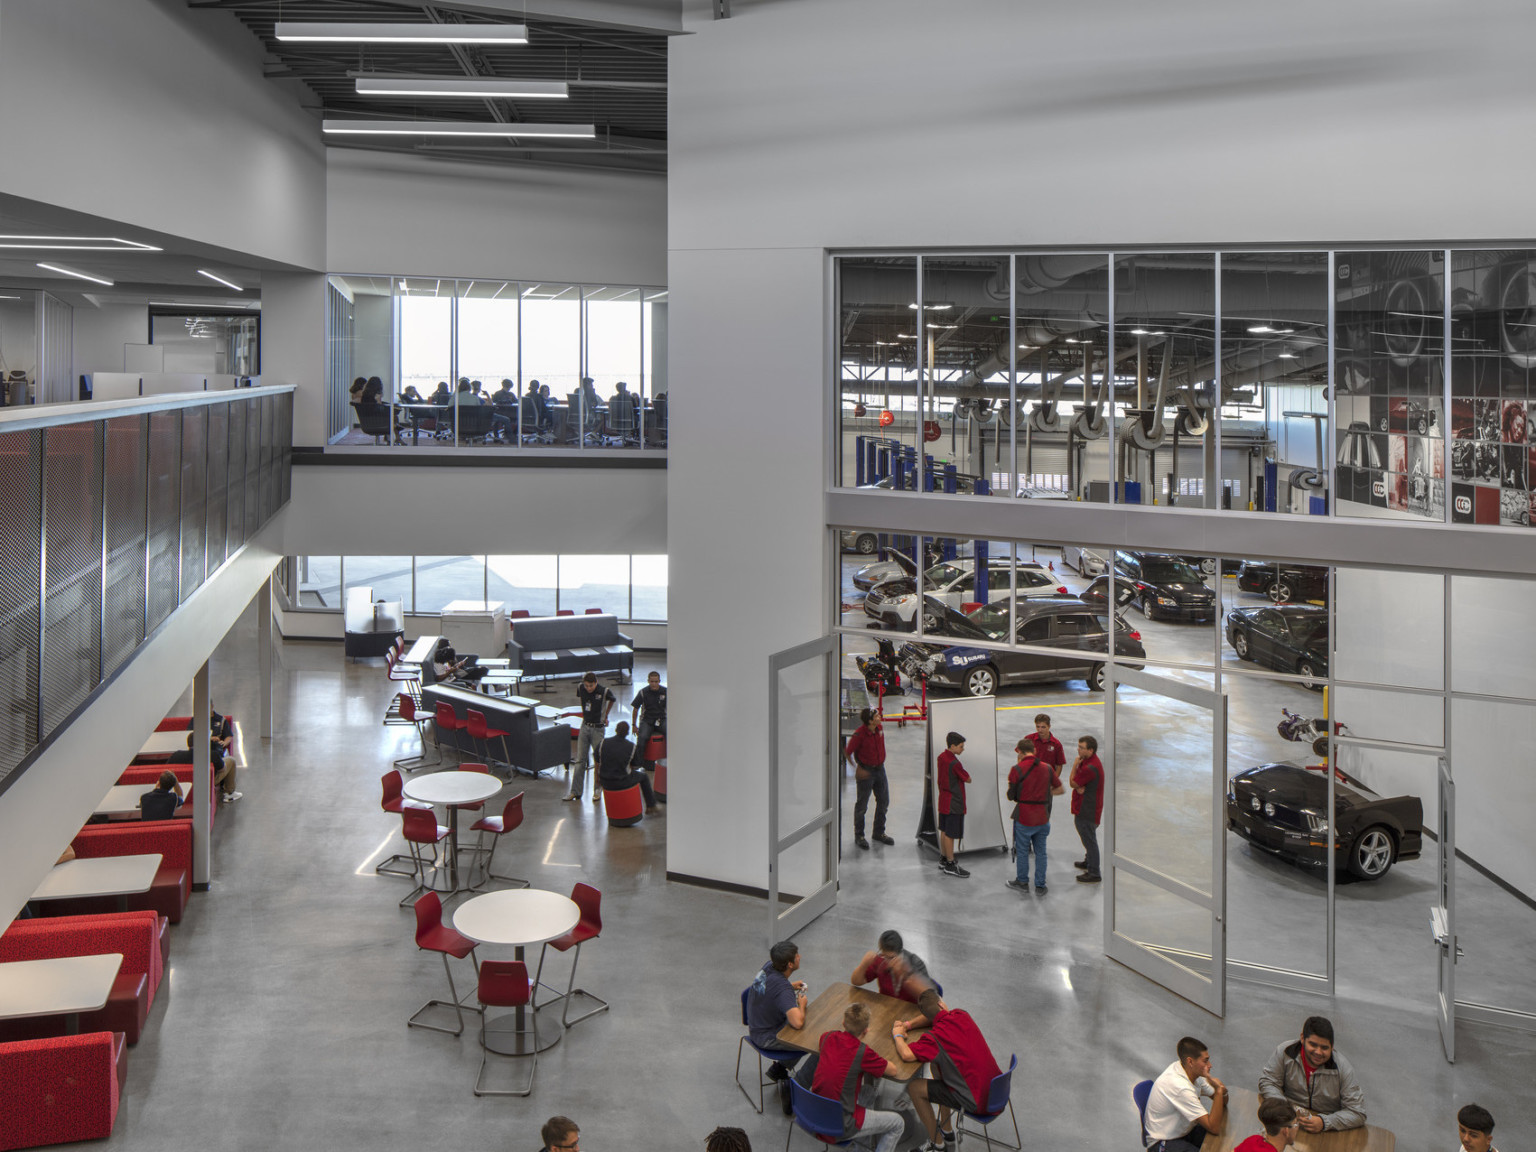 View from 2nd floor balcony overlooking seating and glass entrance to double height auto industry and mechanic specific lab